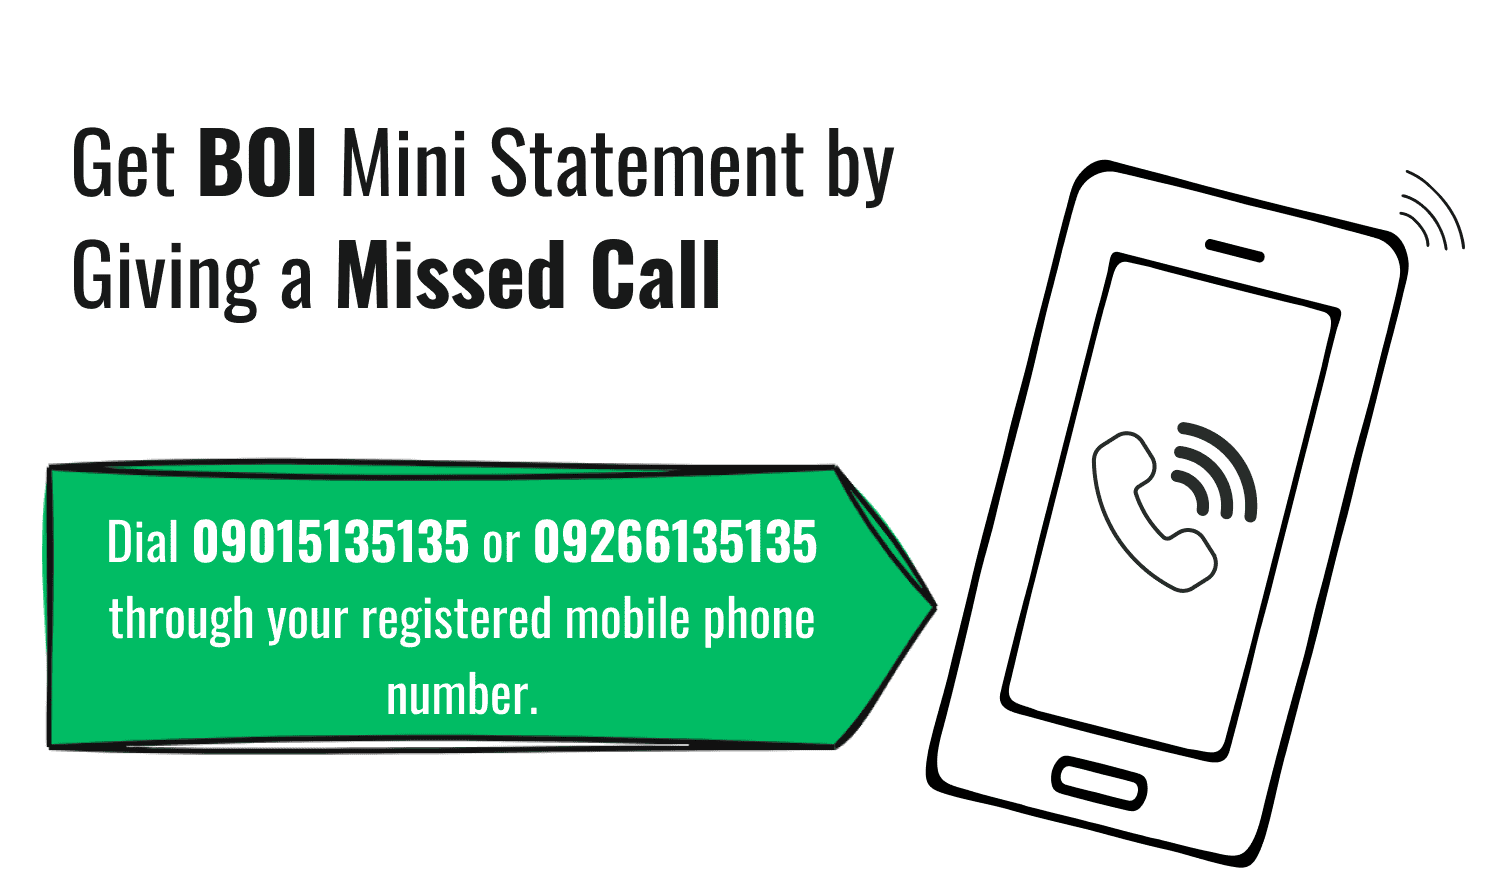 Get Mini Statement by Giving a Missed Call